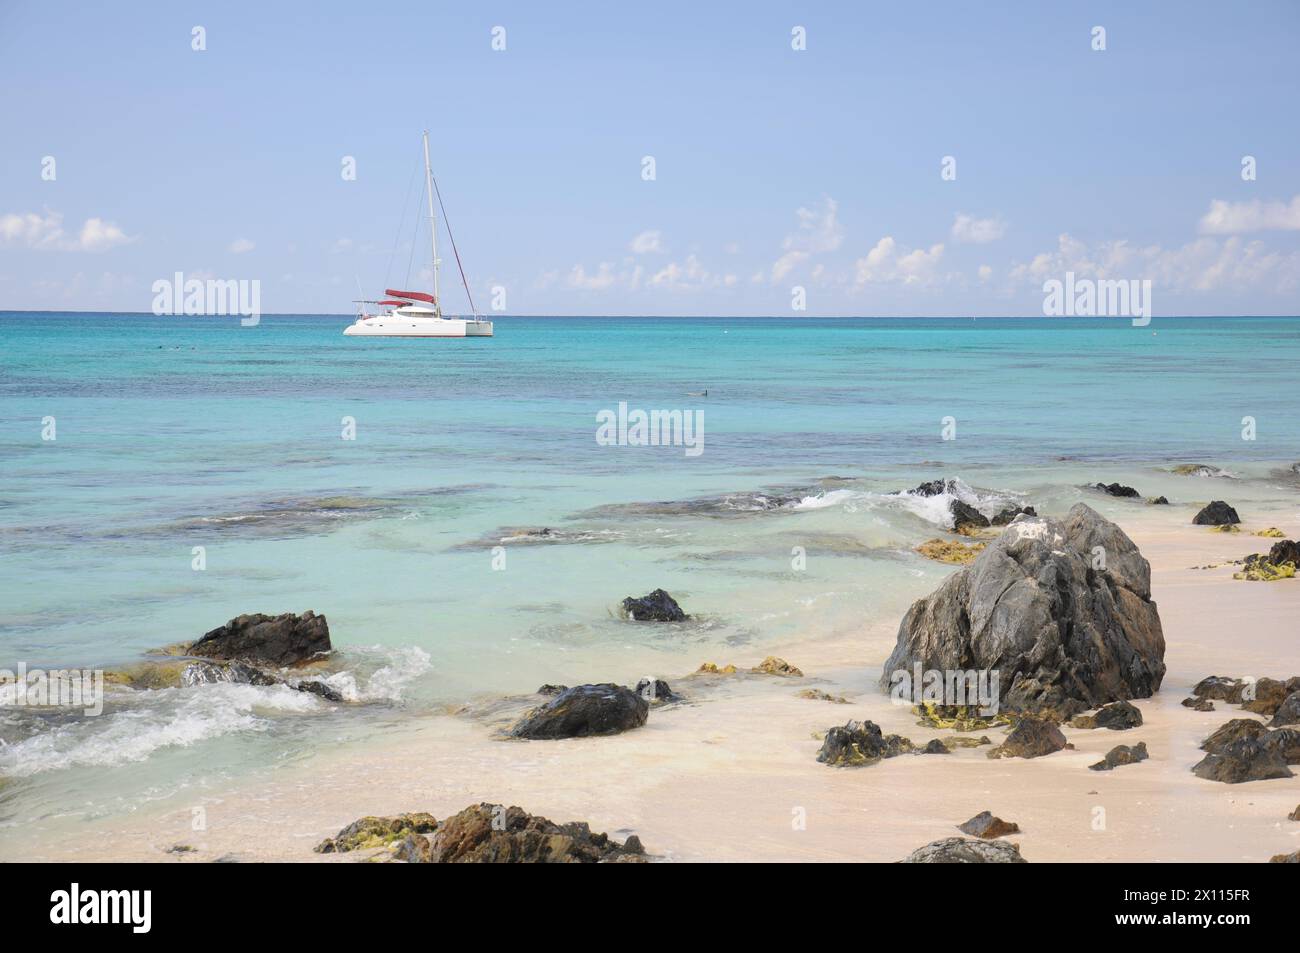 A small boat is sailing in the ocean near a rocky shore. The water is calm and the sky is clear Stock Photo